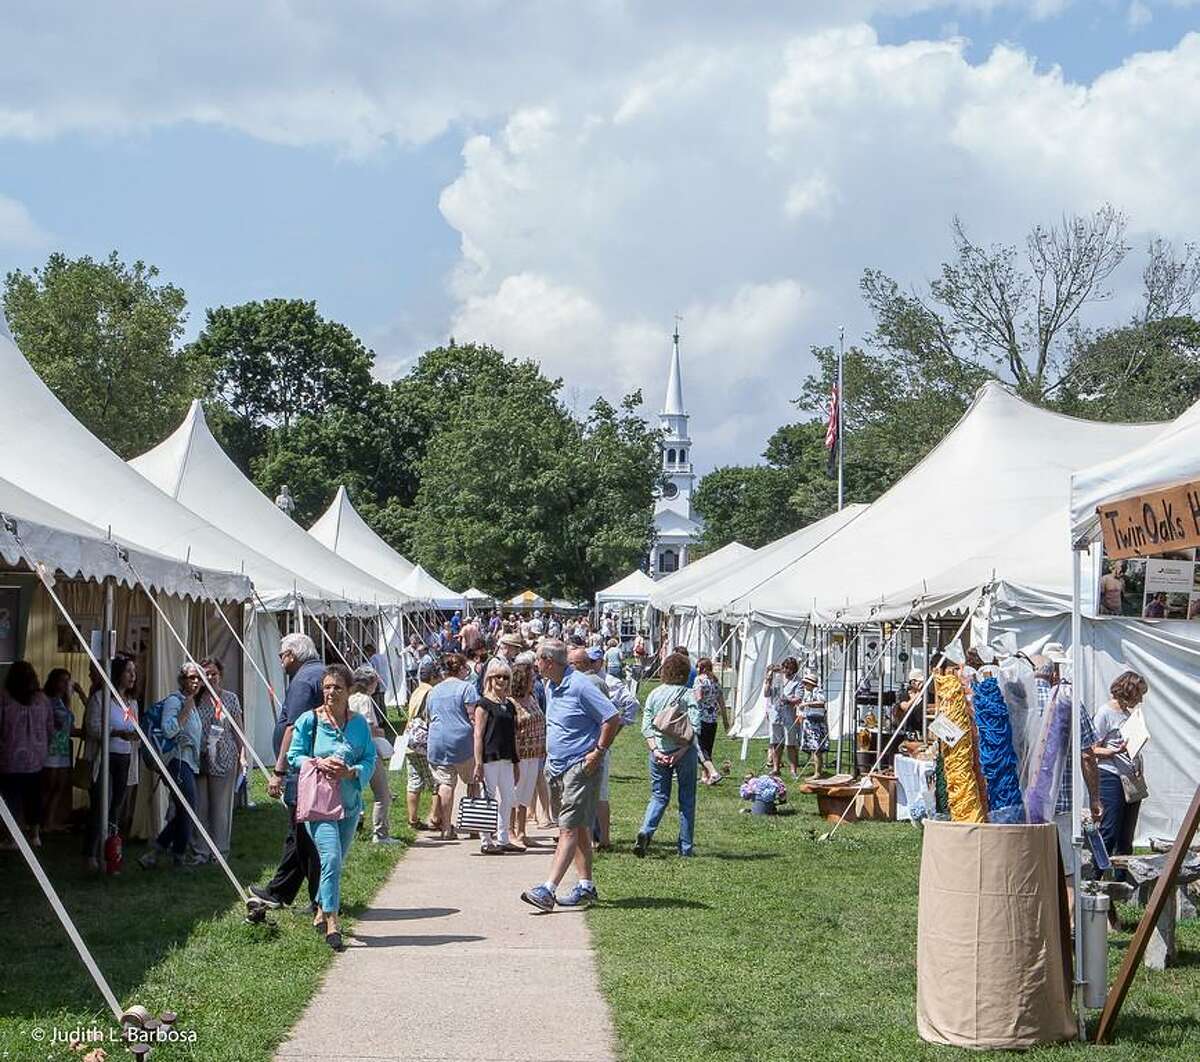 50 things to do this weekend in Connecticut, July 1315